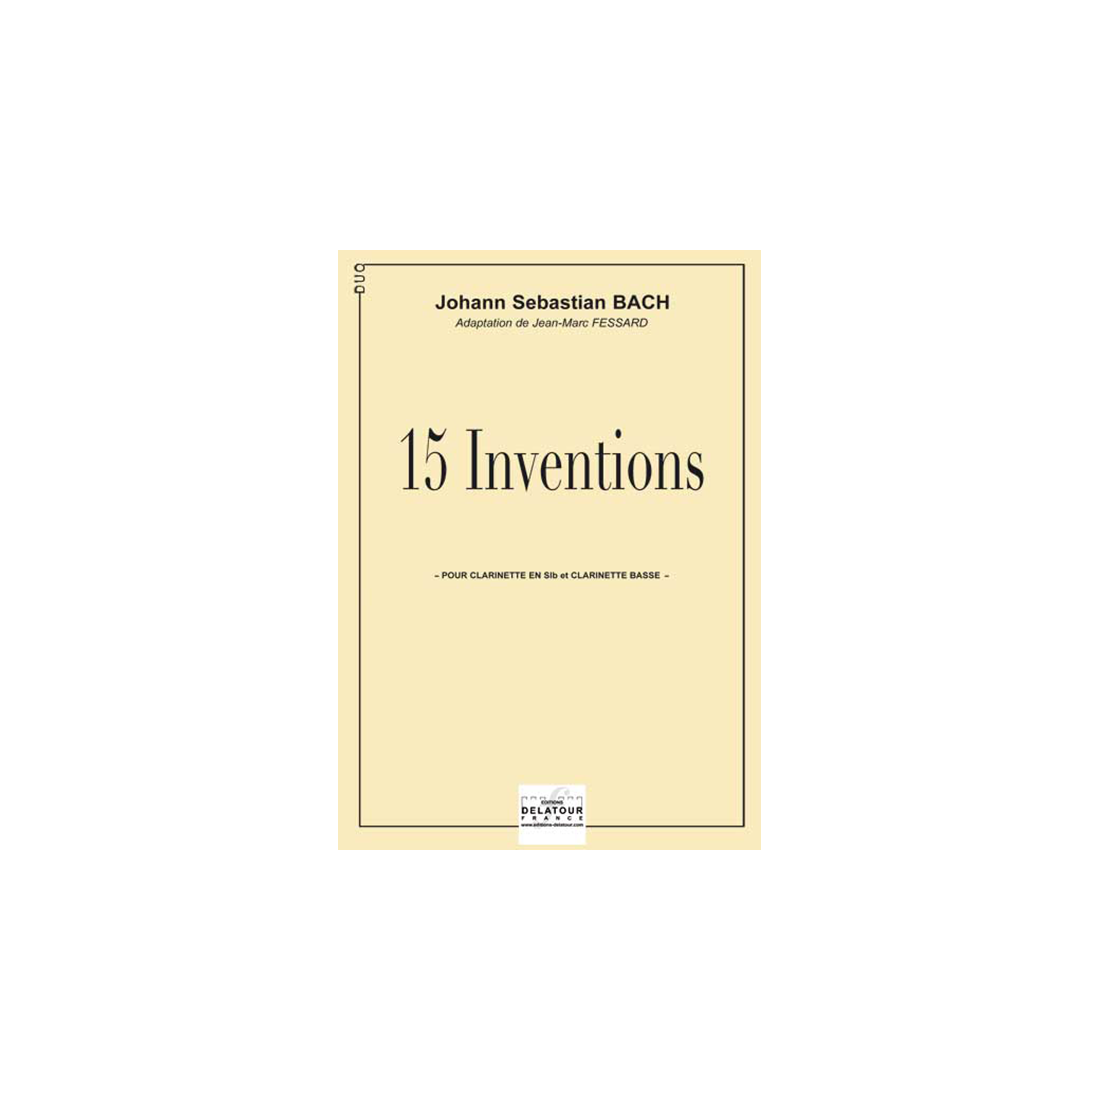 15 Inventions for clarinet and bass clarinet